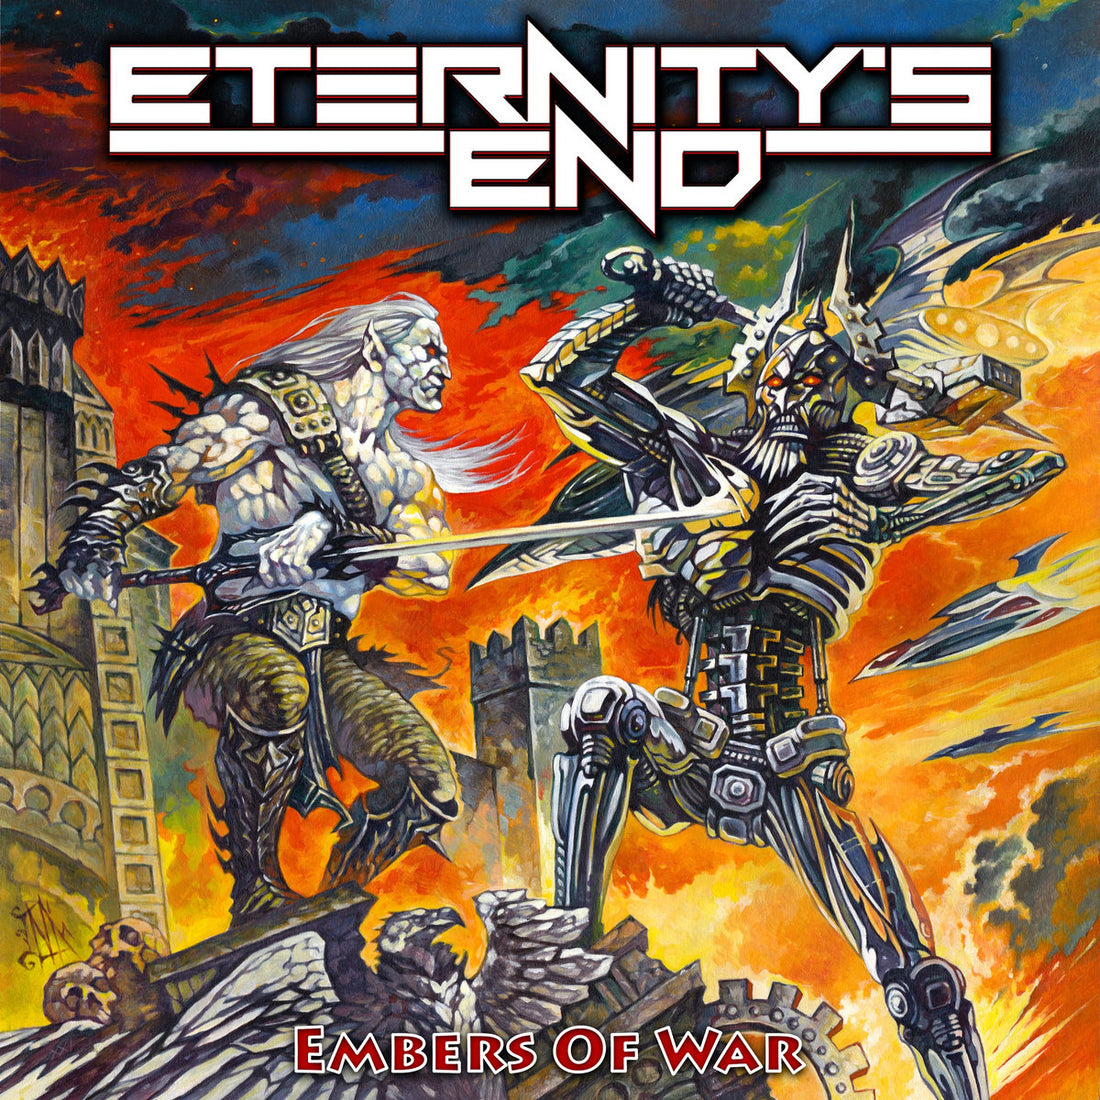 Eternity’s End